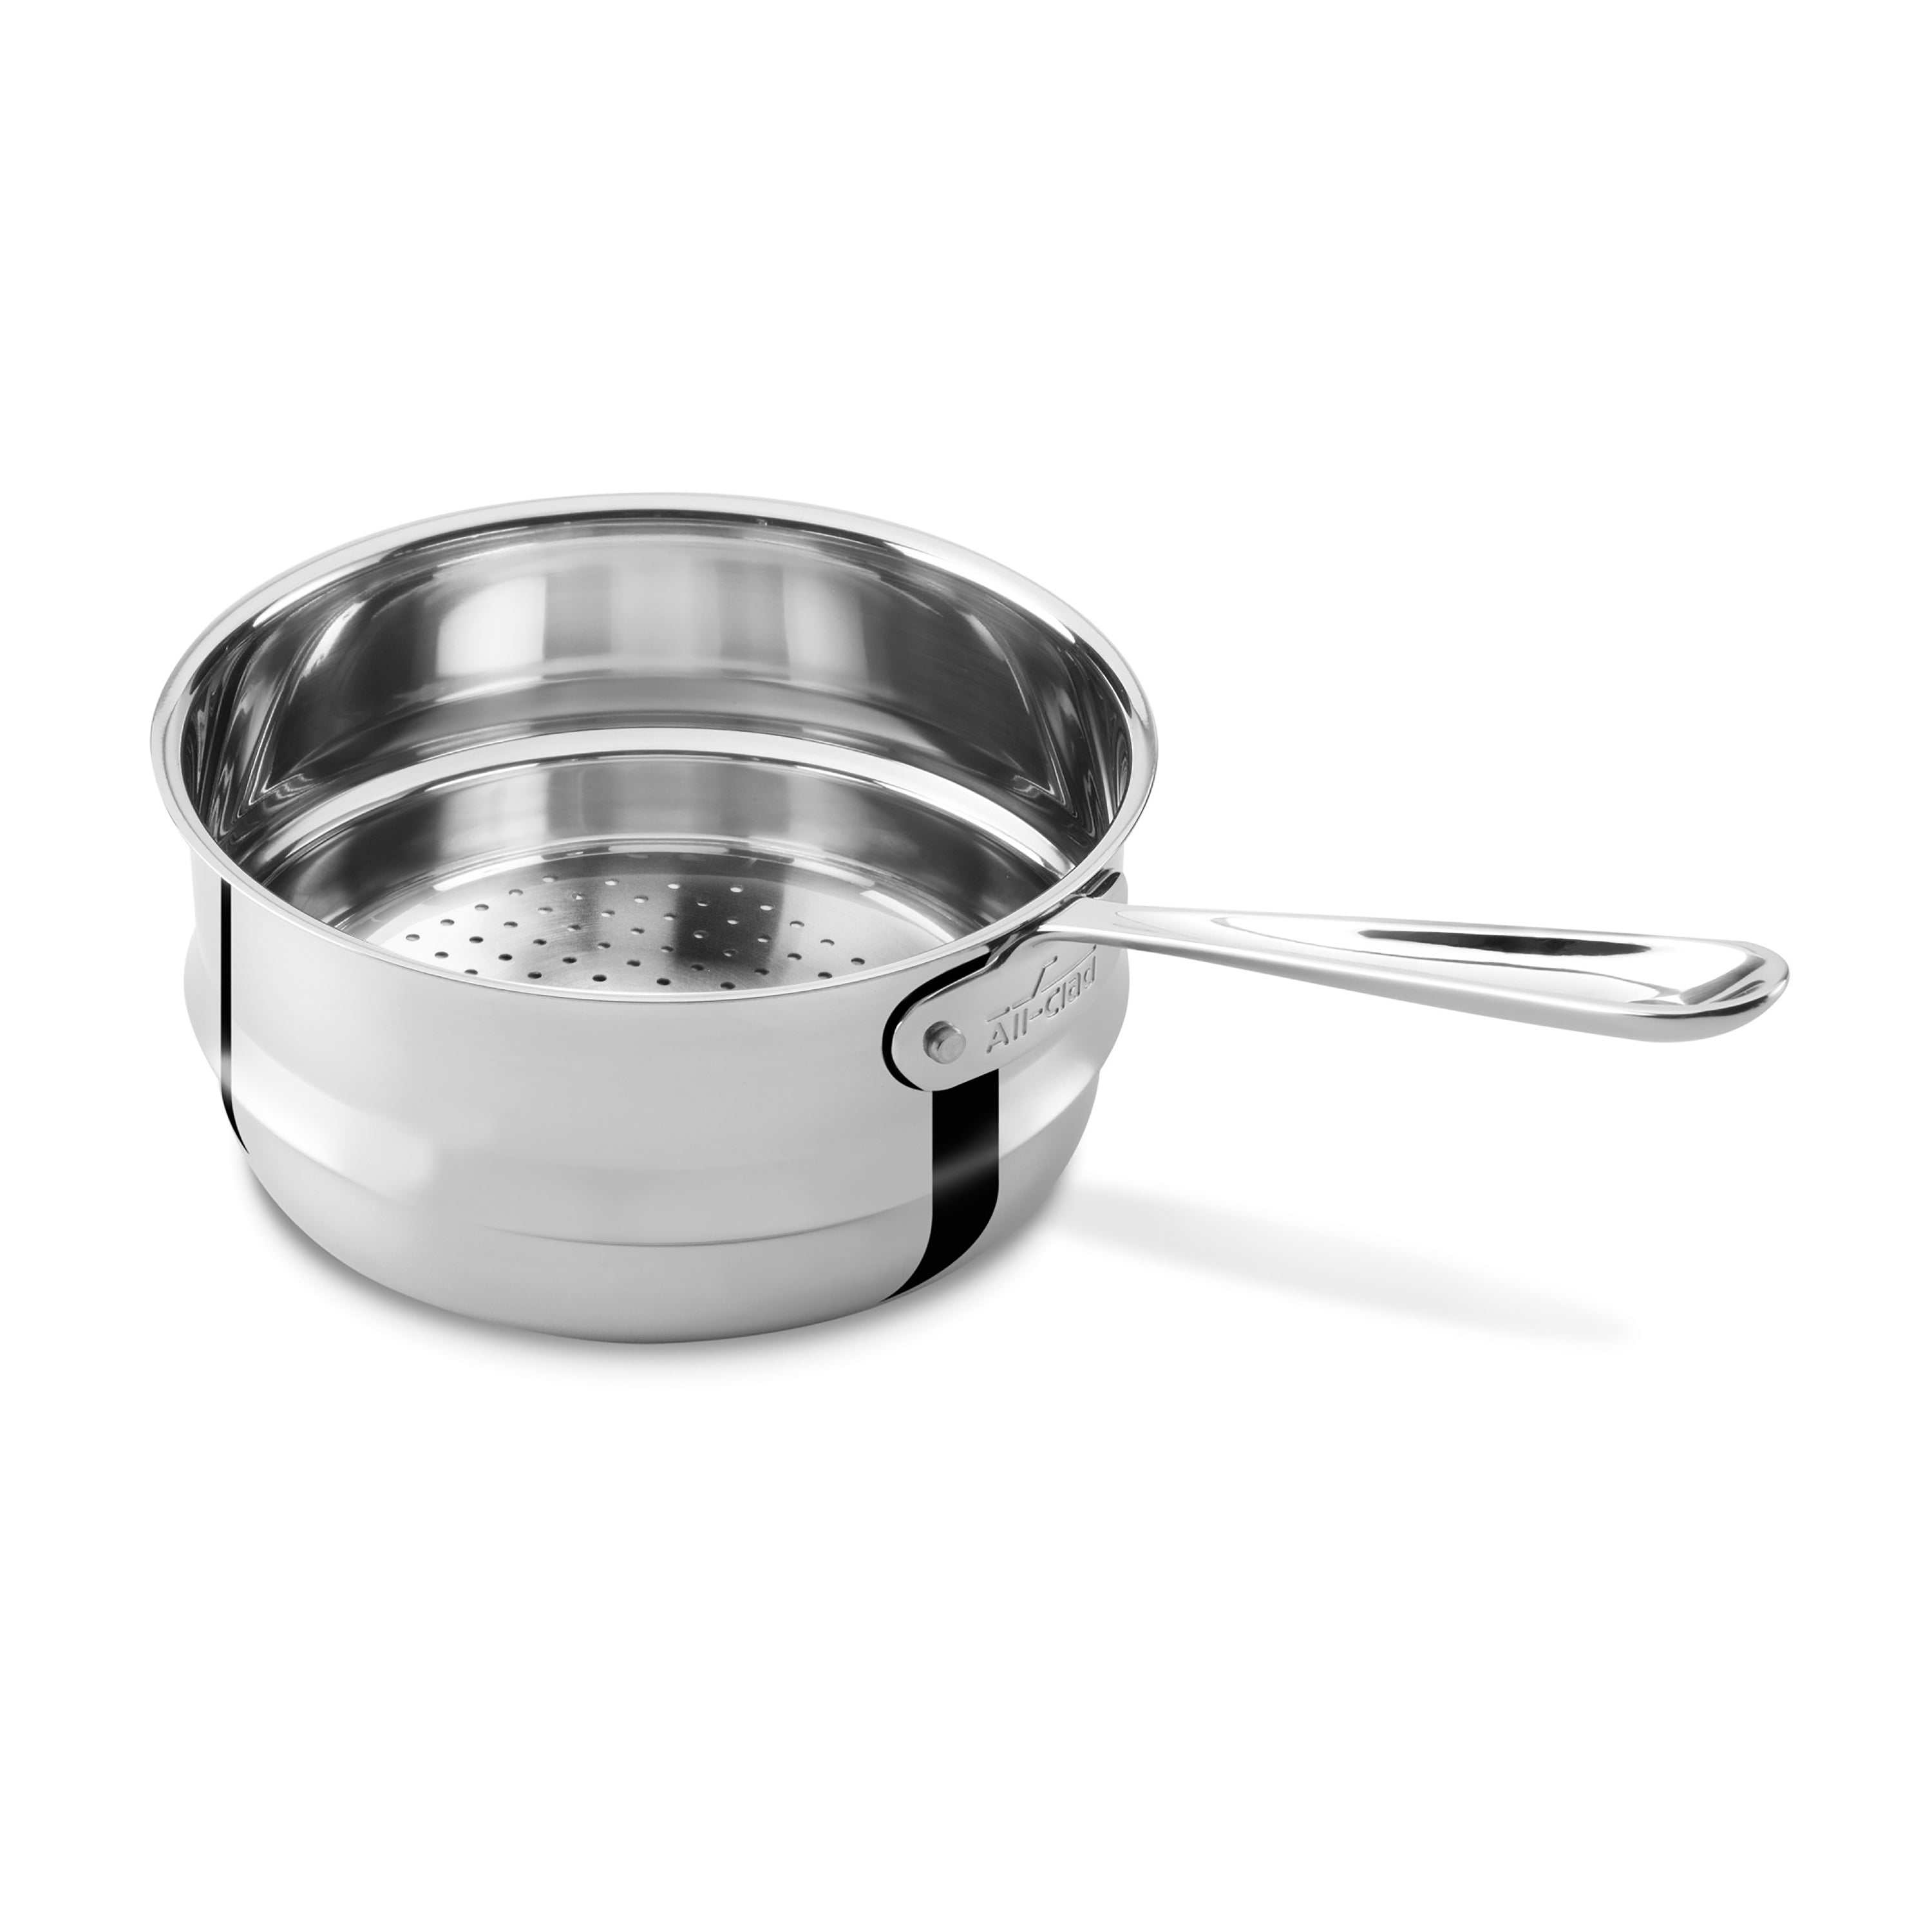 All-Clad All Clad Stainless Steel 1.5 Quart Sauce Pan with Lid